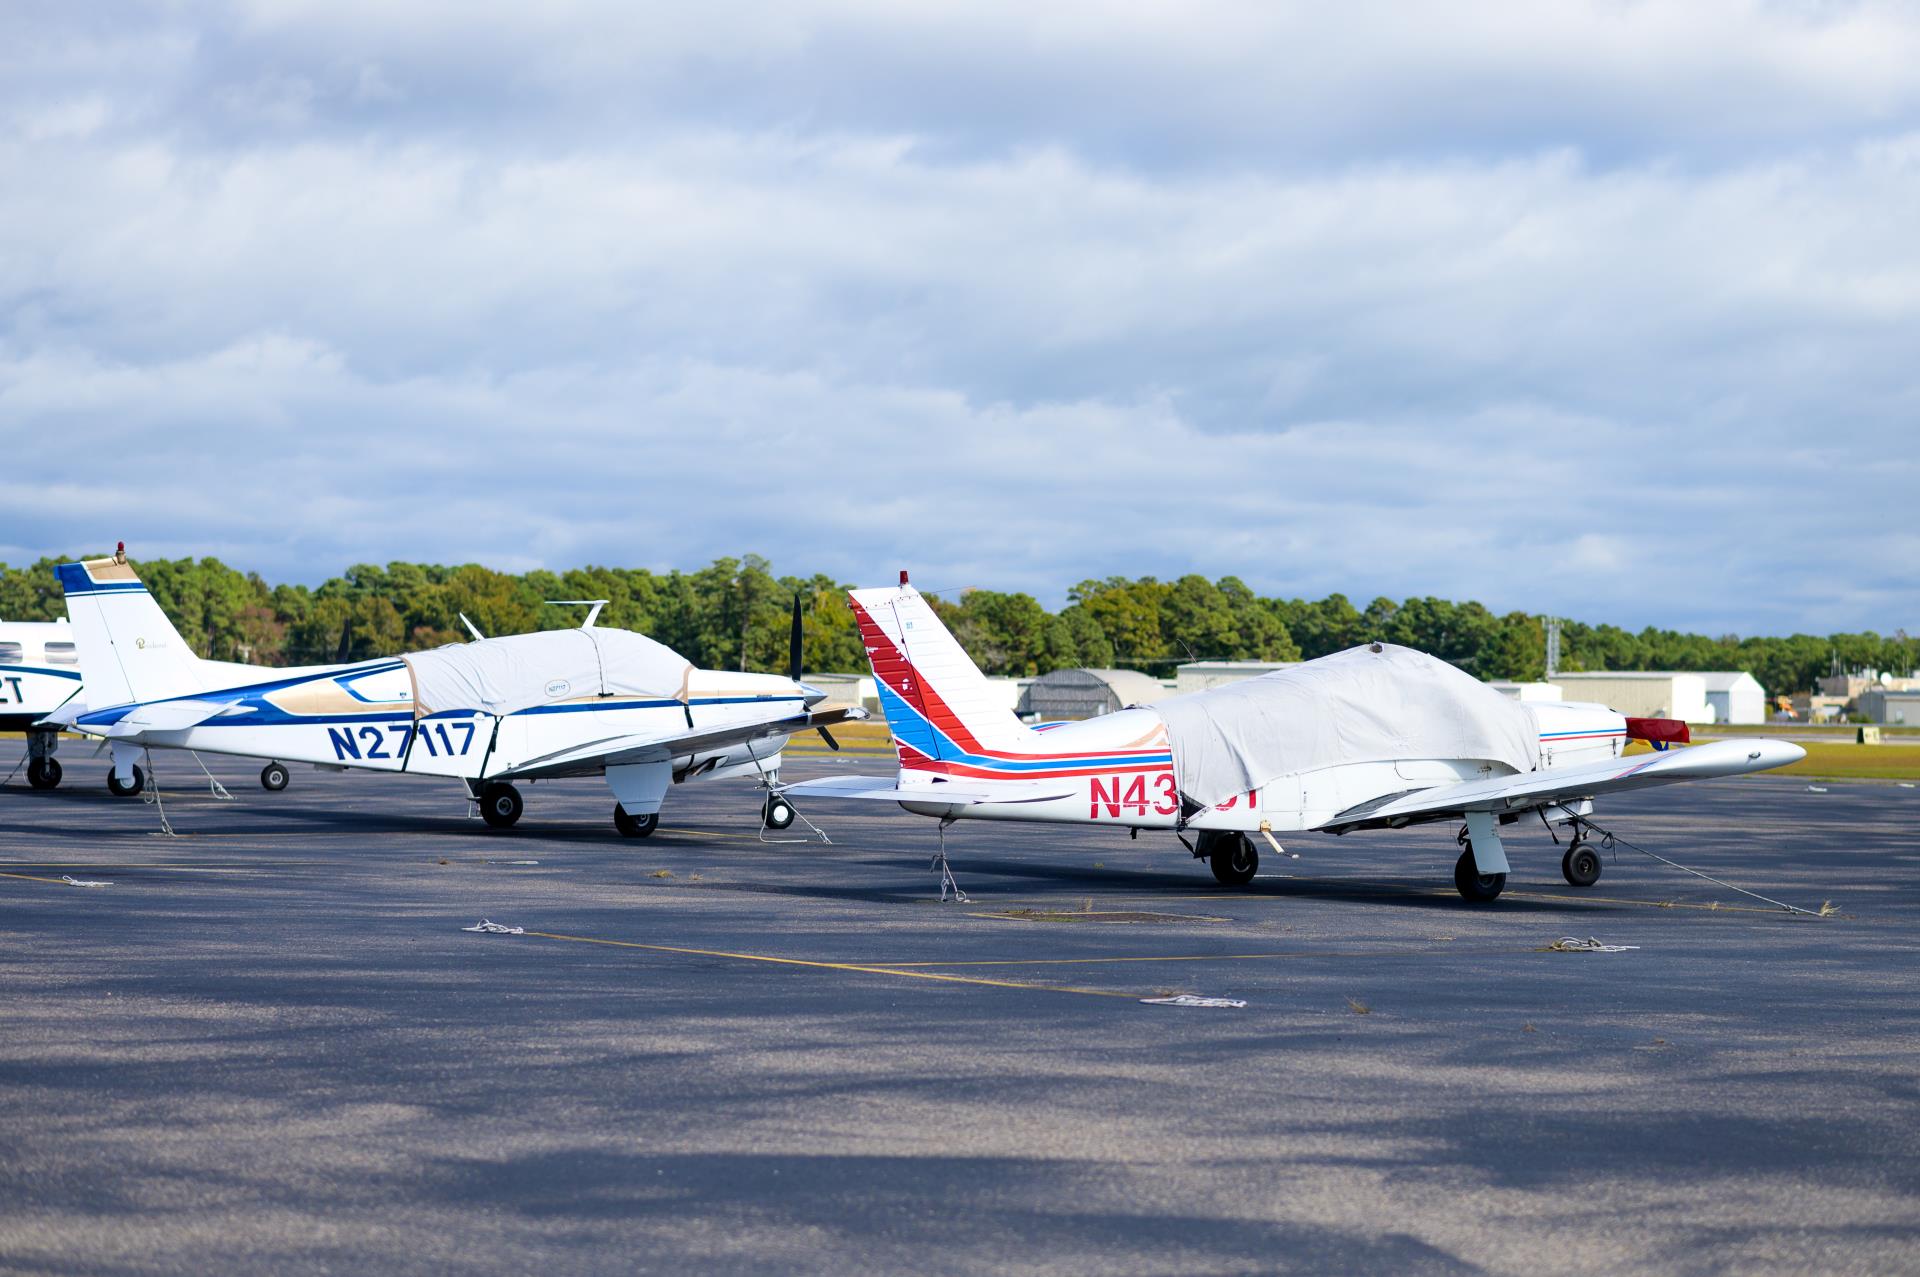 Airplanes at the Dare County Regional Airport